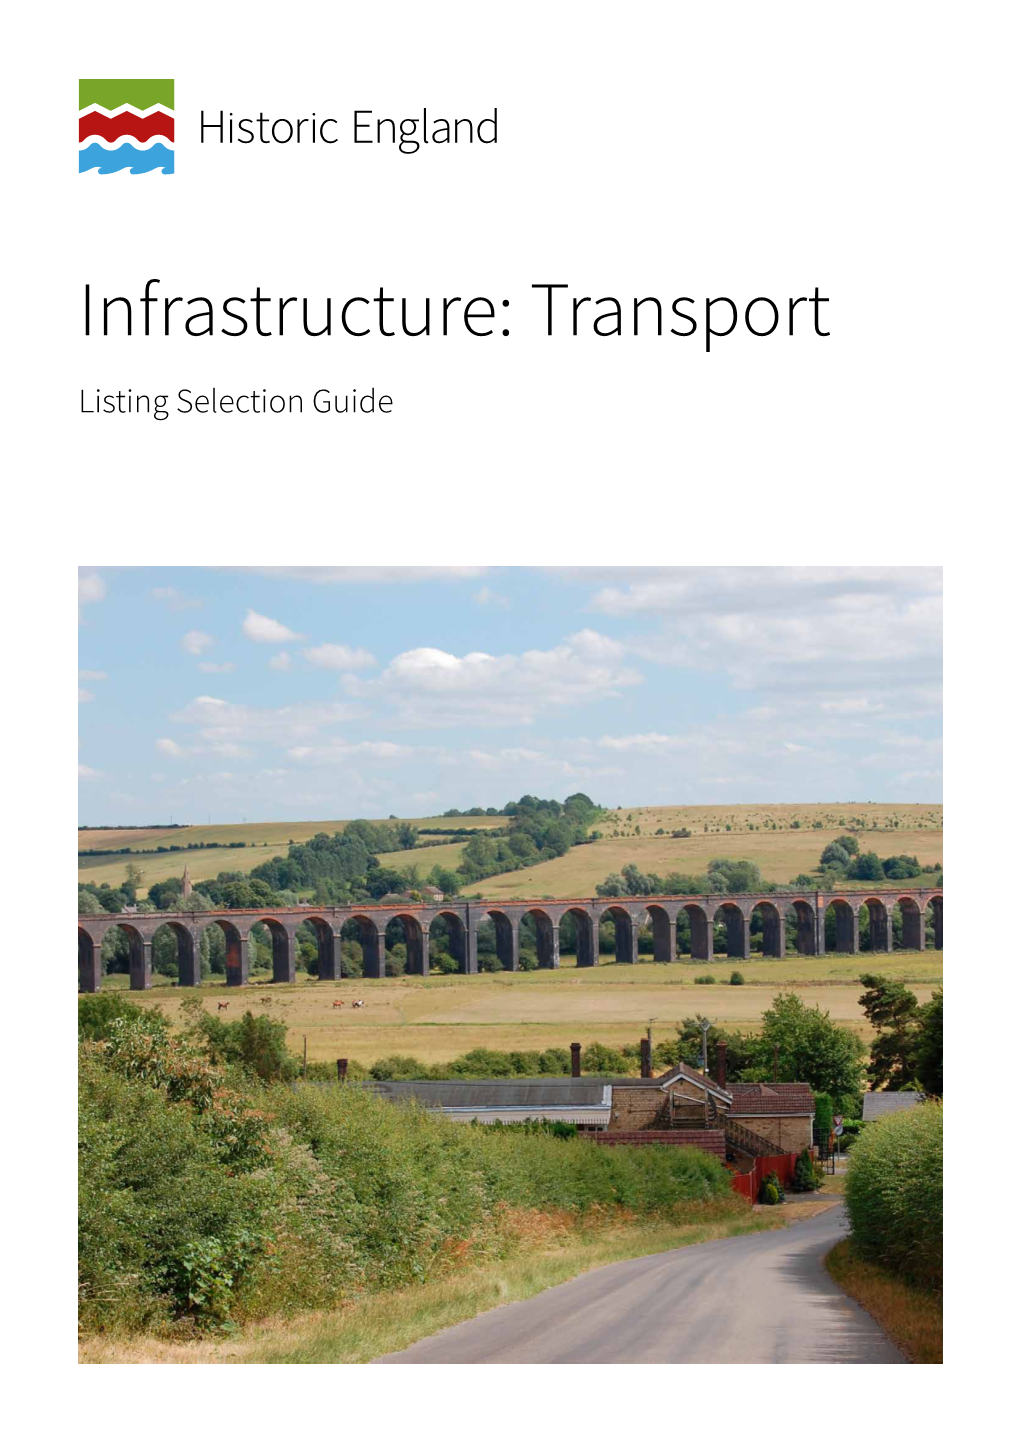 Infrastructure: Transport Listing Selection Guide Summary